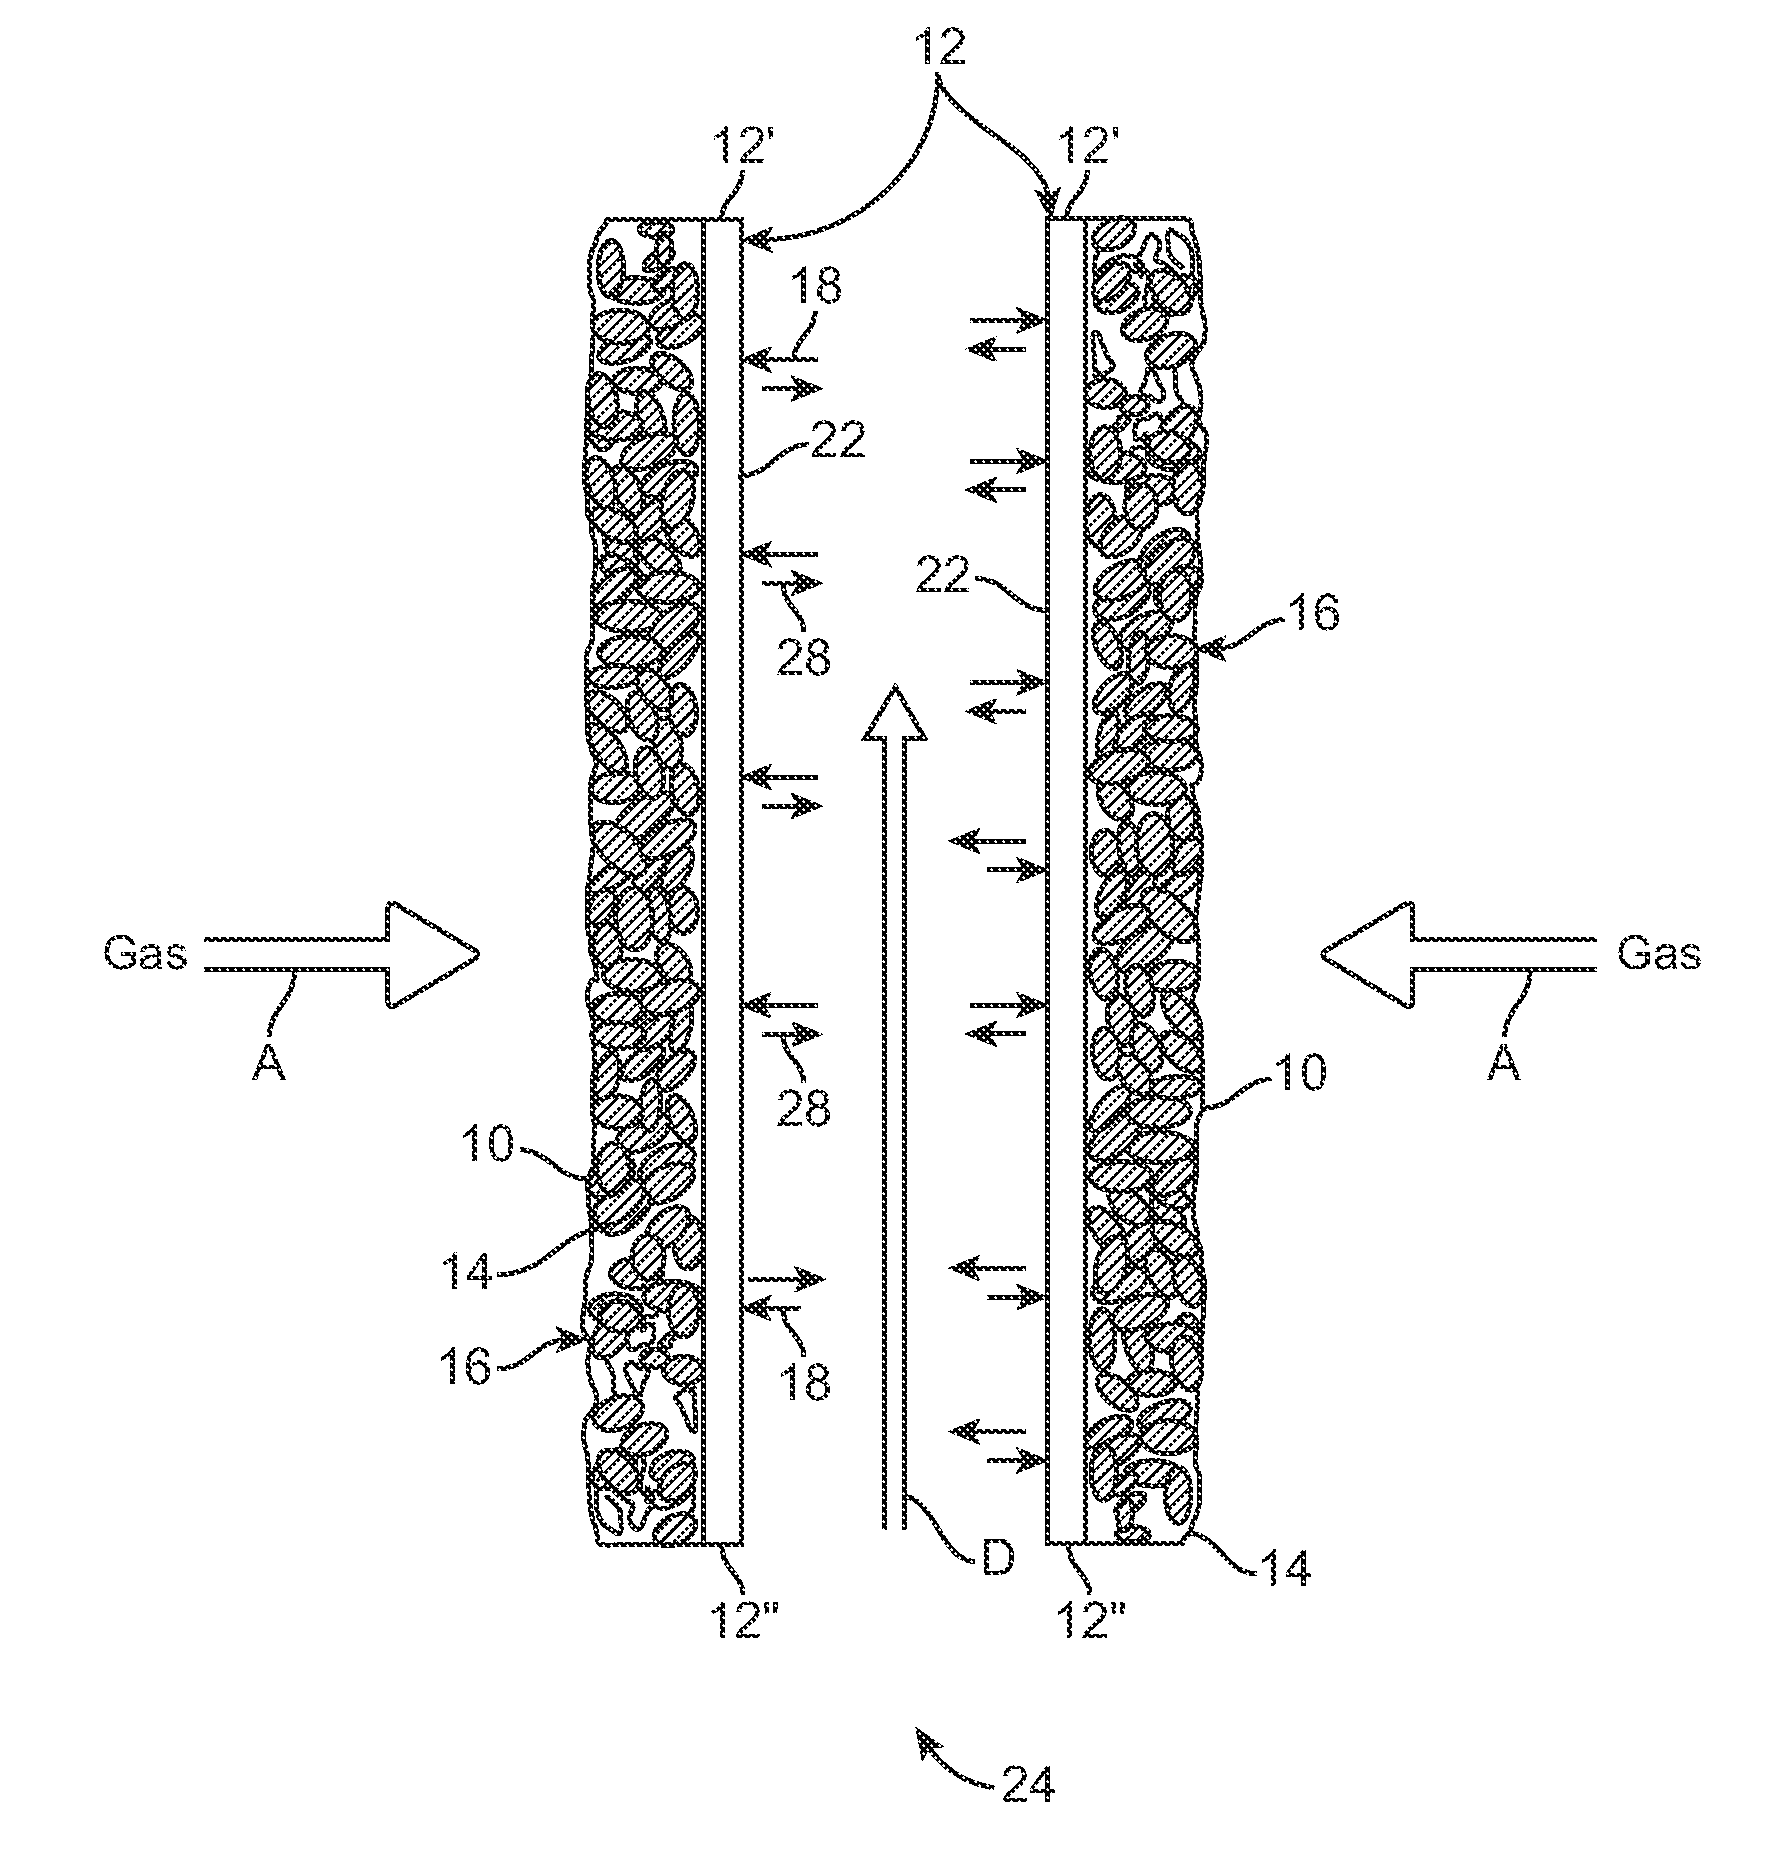 Method of conversion of syngas using microorganism on hydrophilic membrane